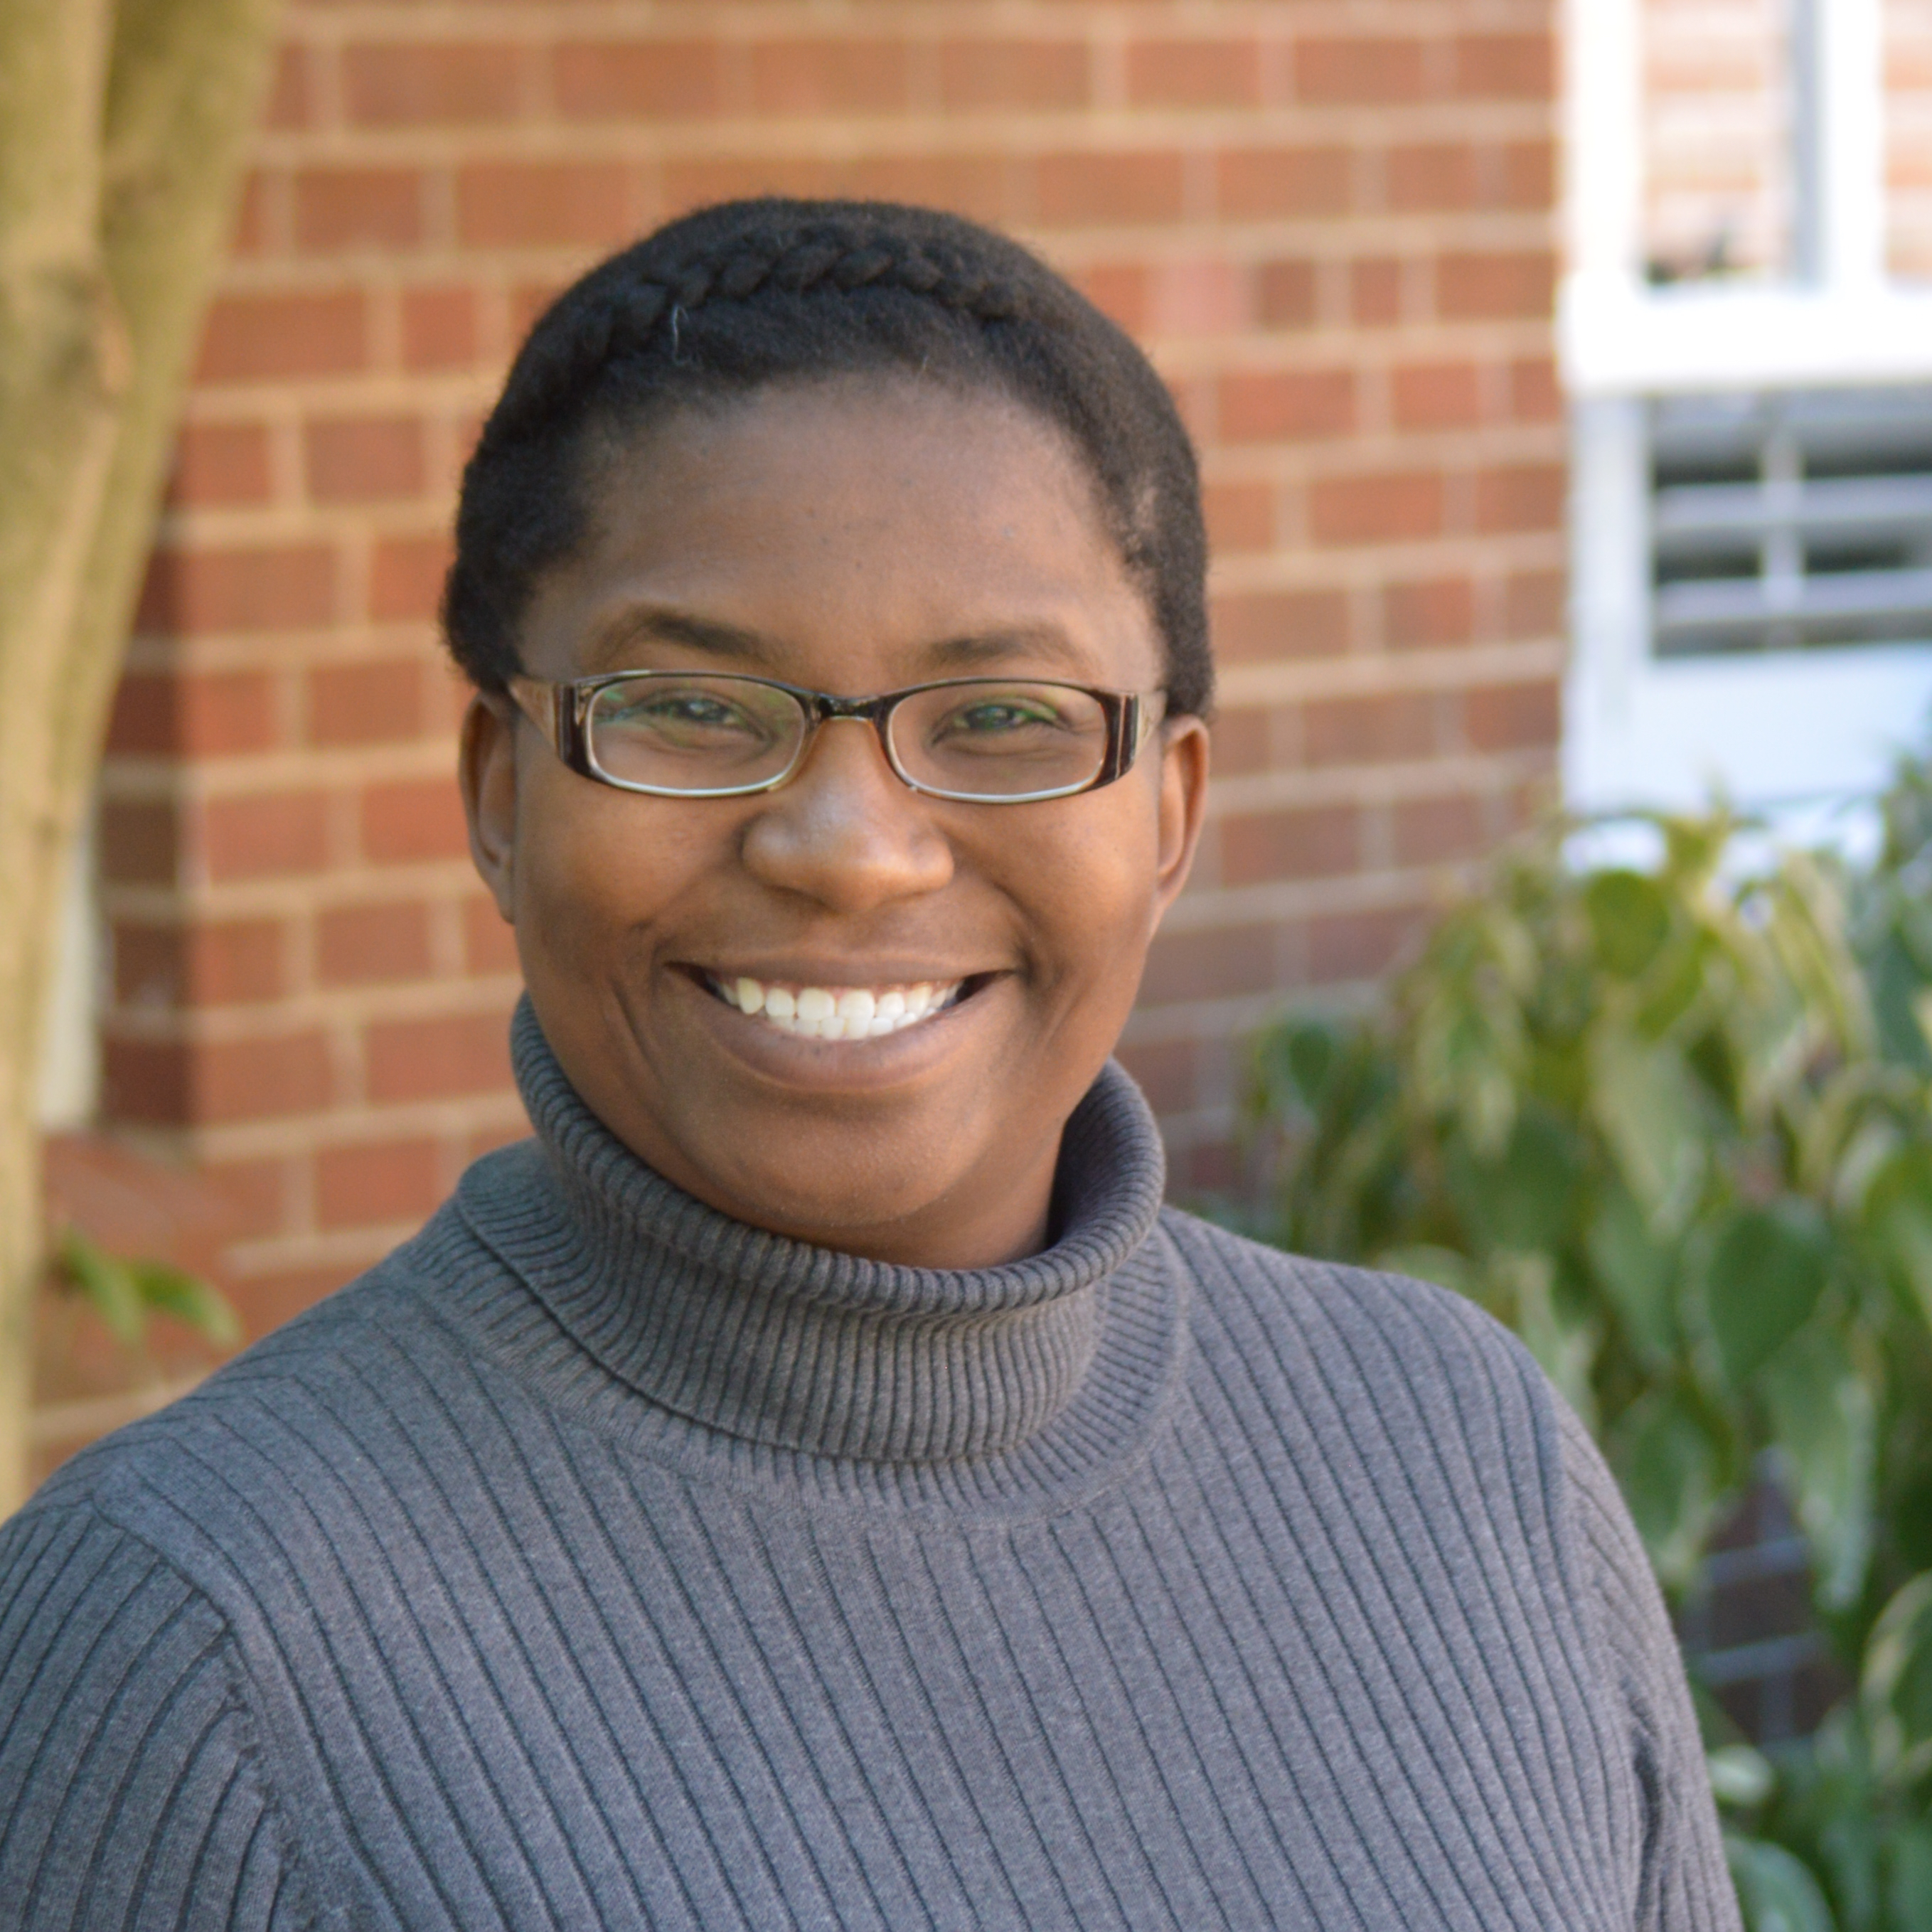 <strong>North Carolina Council of Churches Announces Nicole Johnson as Program Director for Partners in Health and Wholeness</strong>